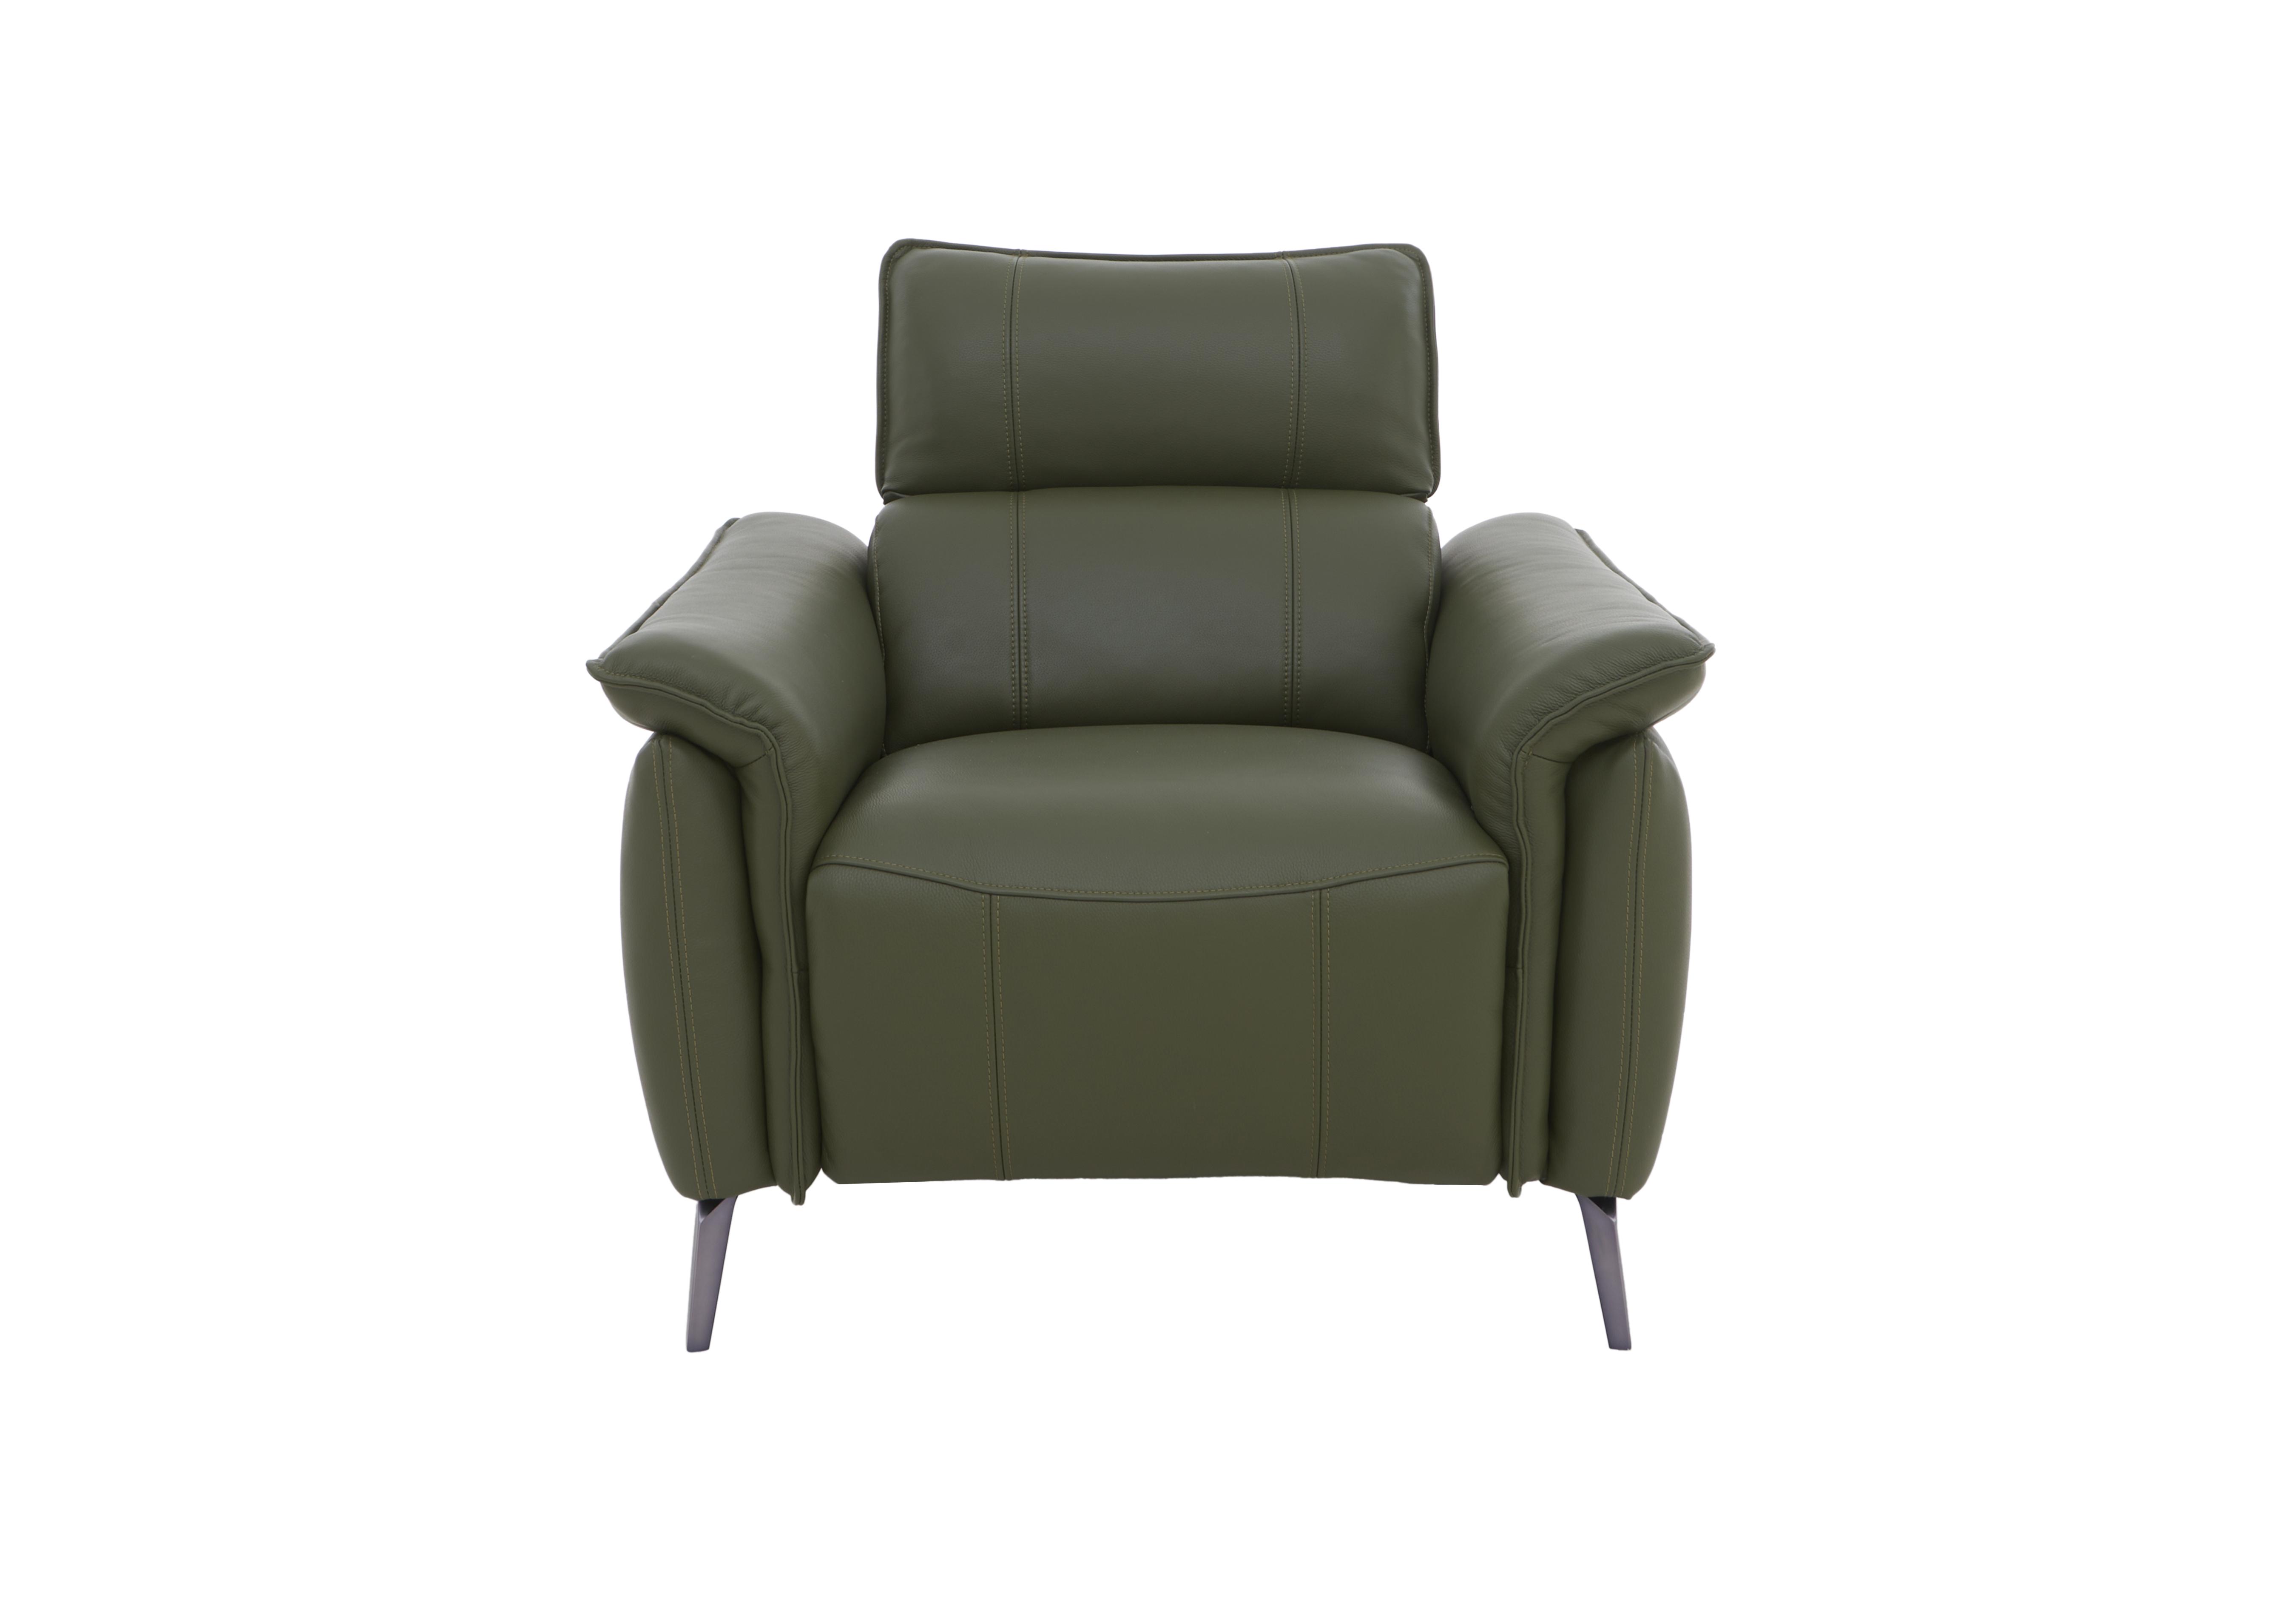 Jude Leather Armchair in Montana Oslo Pine Cat-40/10 on Furniture Village